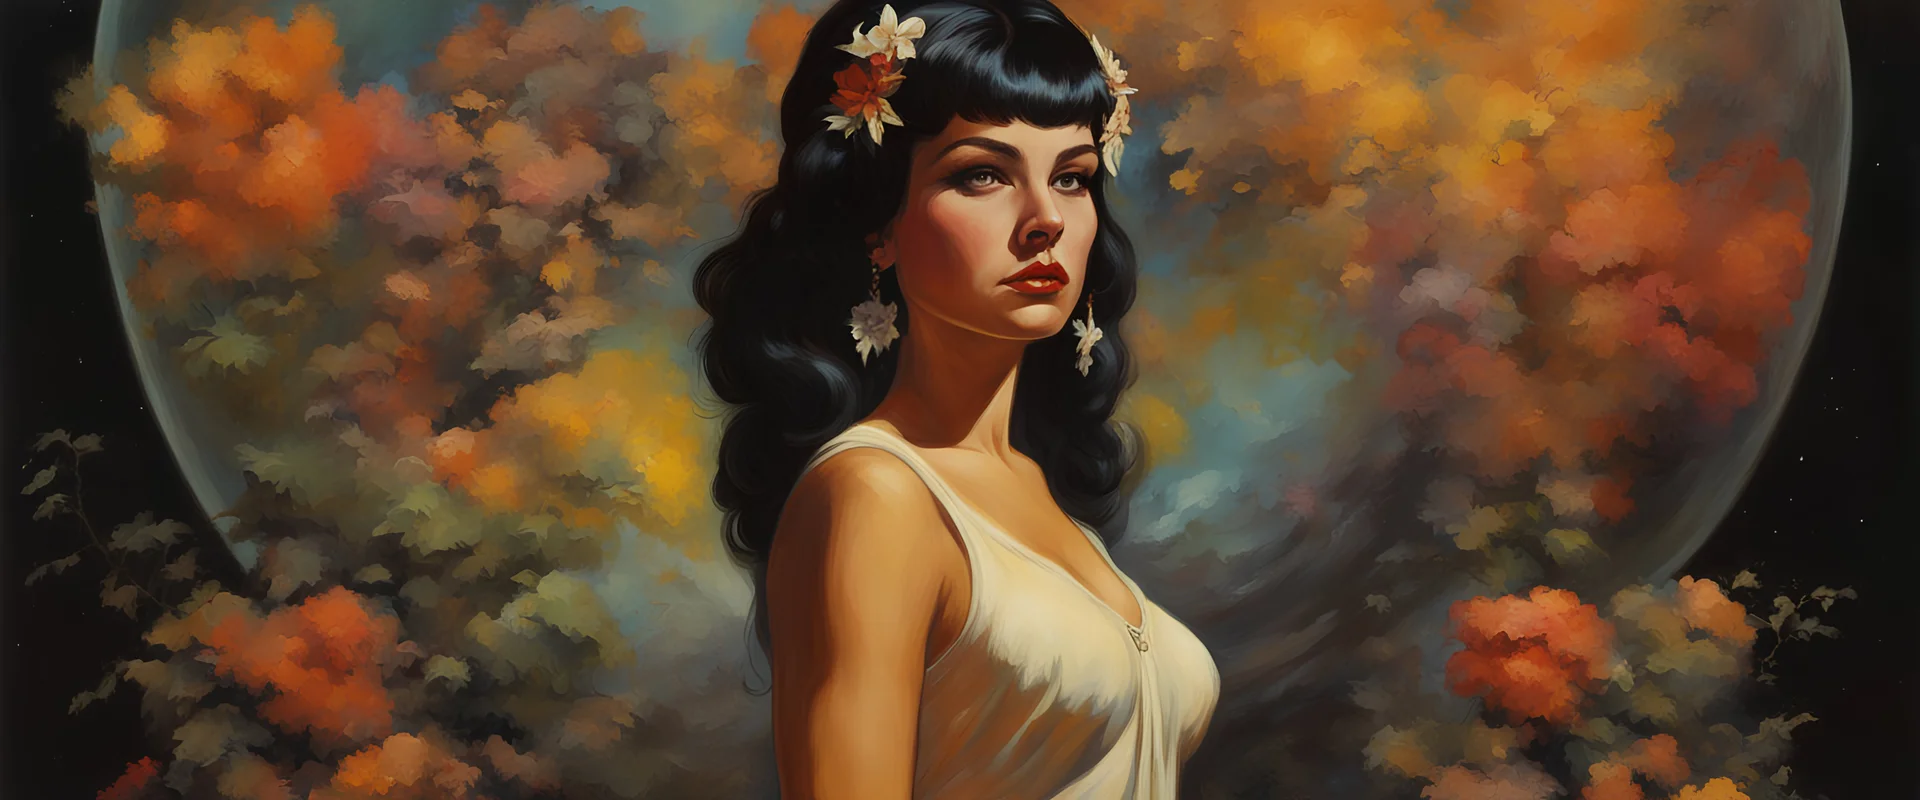 beautiful girl ,mugshot, Planet of the Vulcans, multicolored, large, floral designs, atmospheric, beautiful, oil painting by Frank Frazetta, 4k UHD, Photorealistic, professional quality